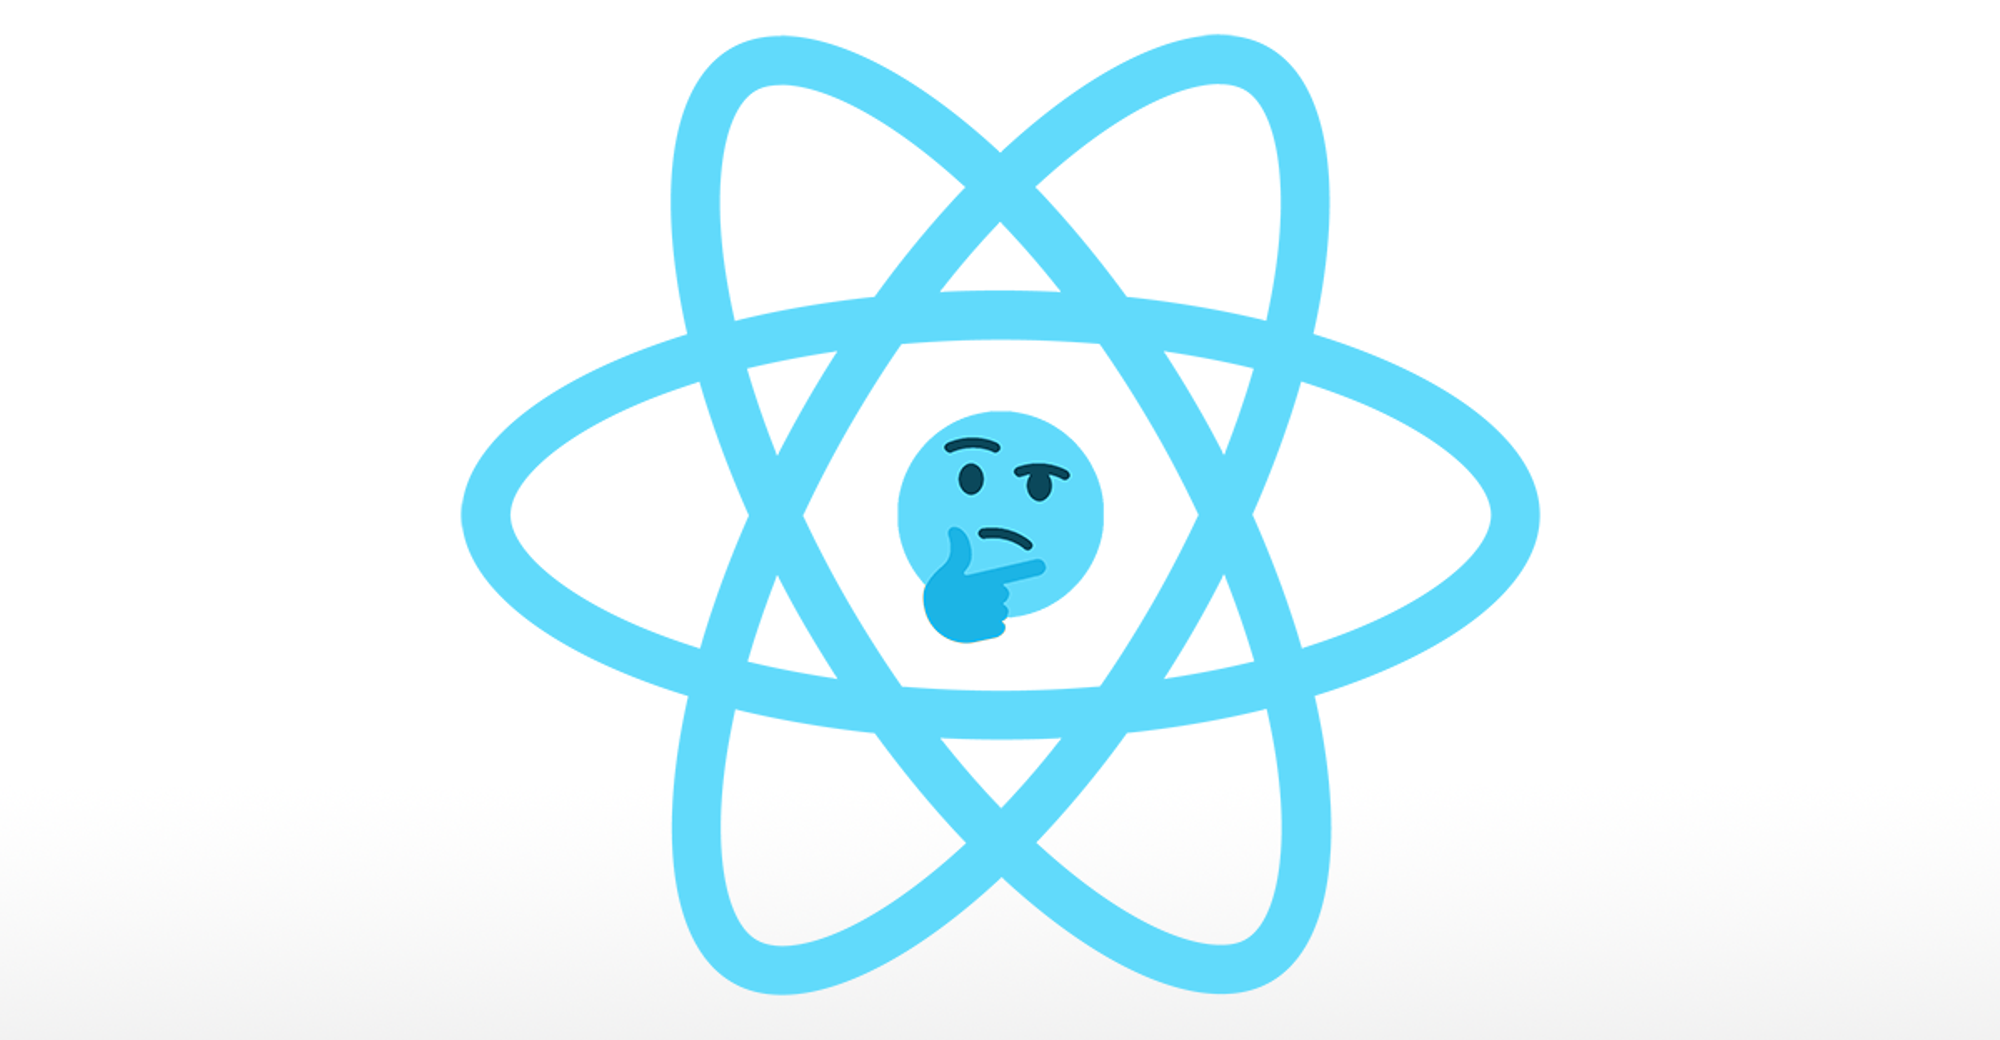 How to think in React (starting with 4 steps)